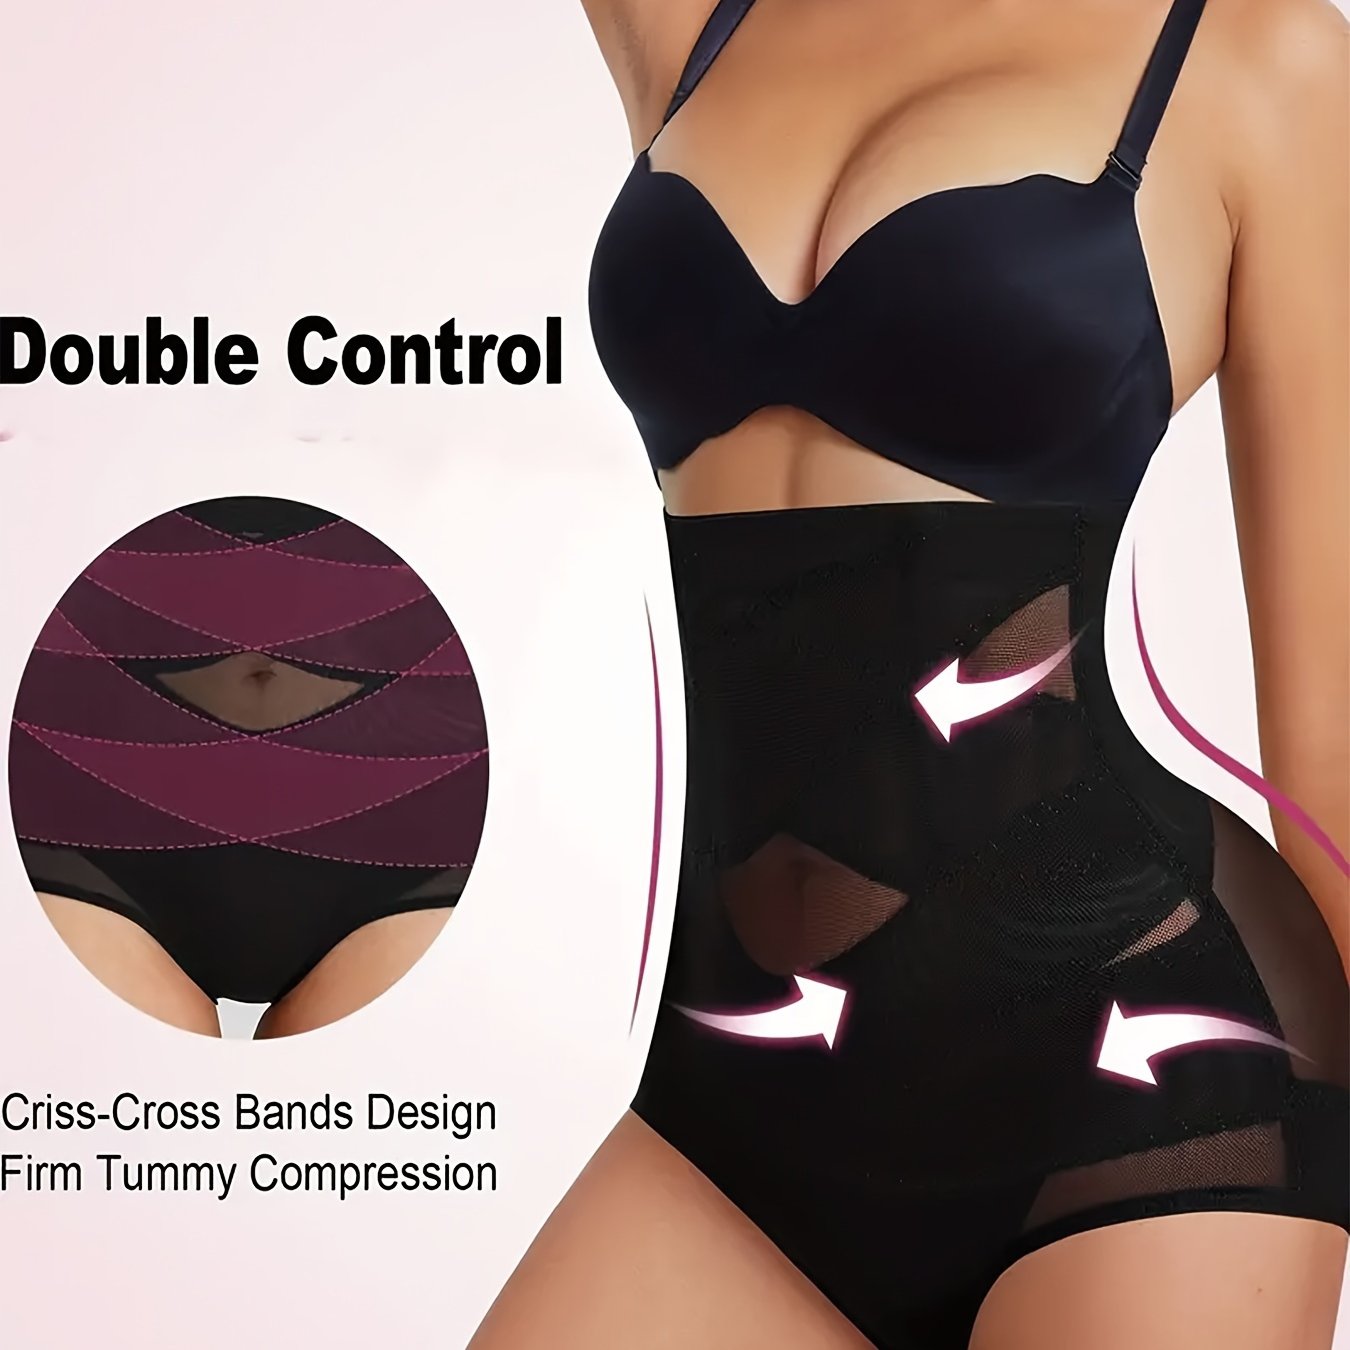 Contrast Mesh Shaping Panties, Tummy Control Compression Panties To Lift &  Shape Buttocks, Women's Underwear & Shapewear